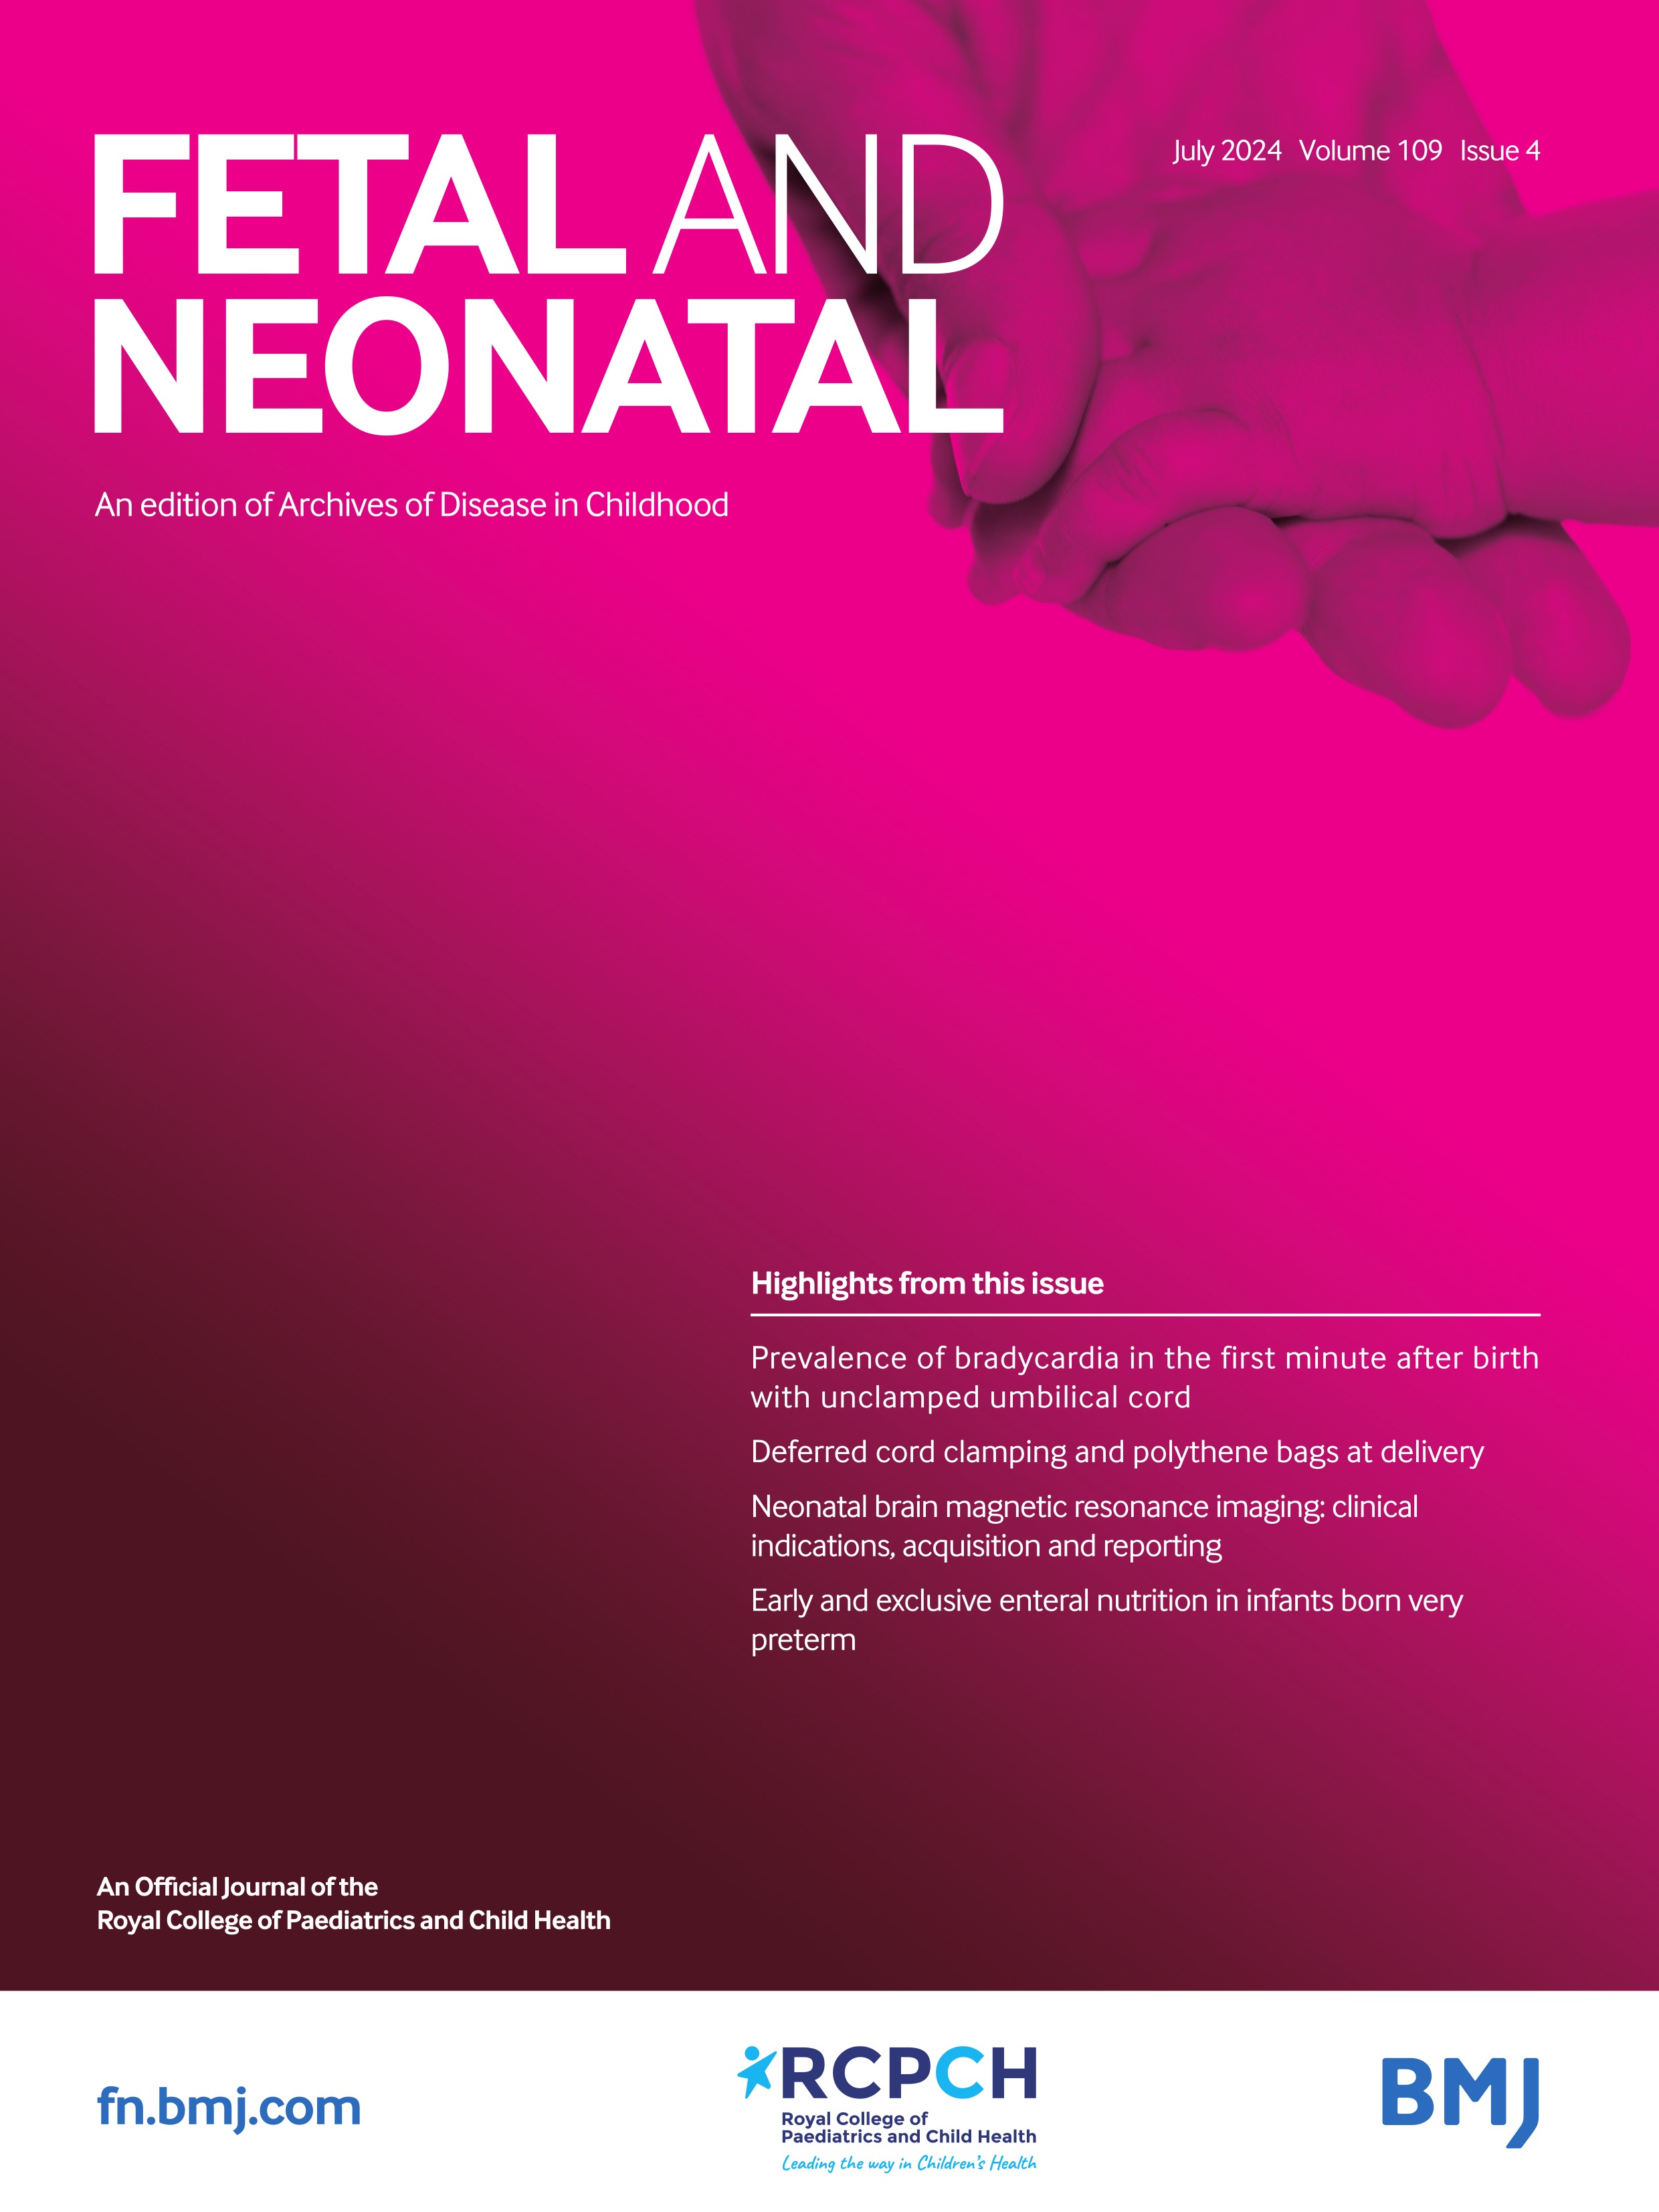 Prevalence and early surgical outcome of congenital diaphragmatic hernia in the Netherlands: a population-based cohort study from the European Pediatric Surgical Audit